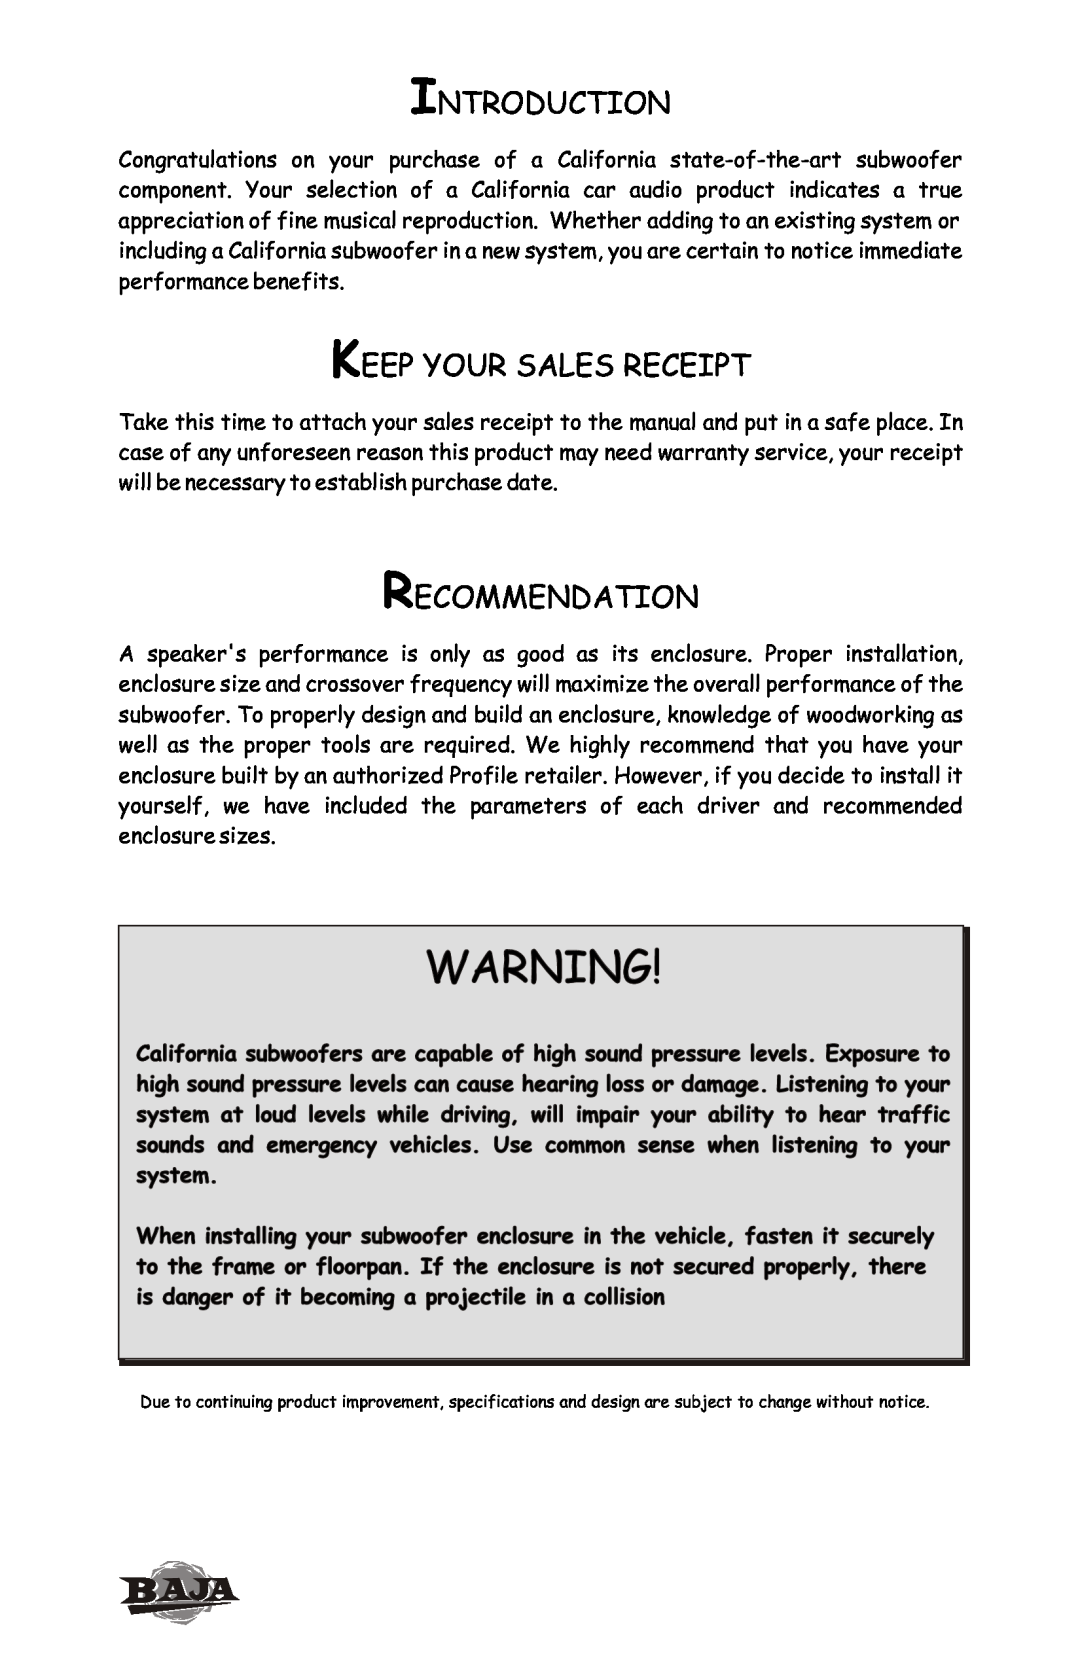 Profile BX12 installation instructions Introduction, Keep Your Sales Receipt, Recommendation 